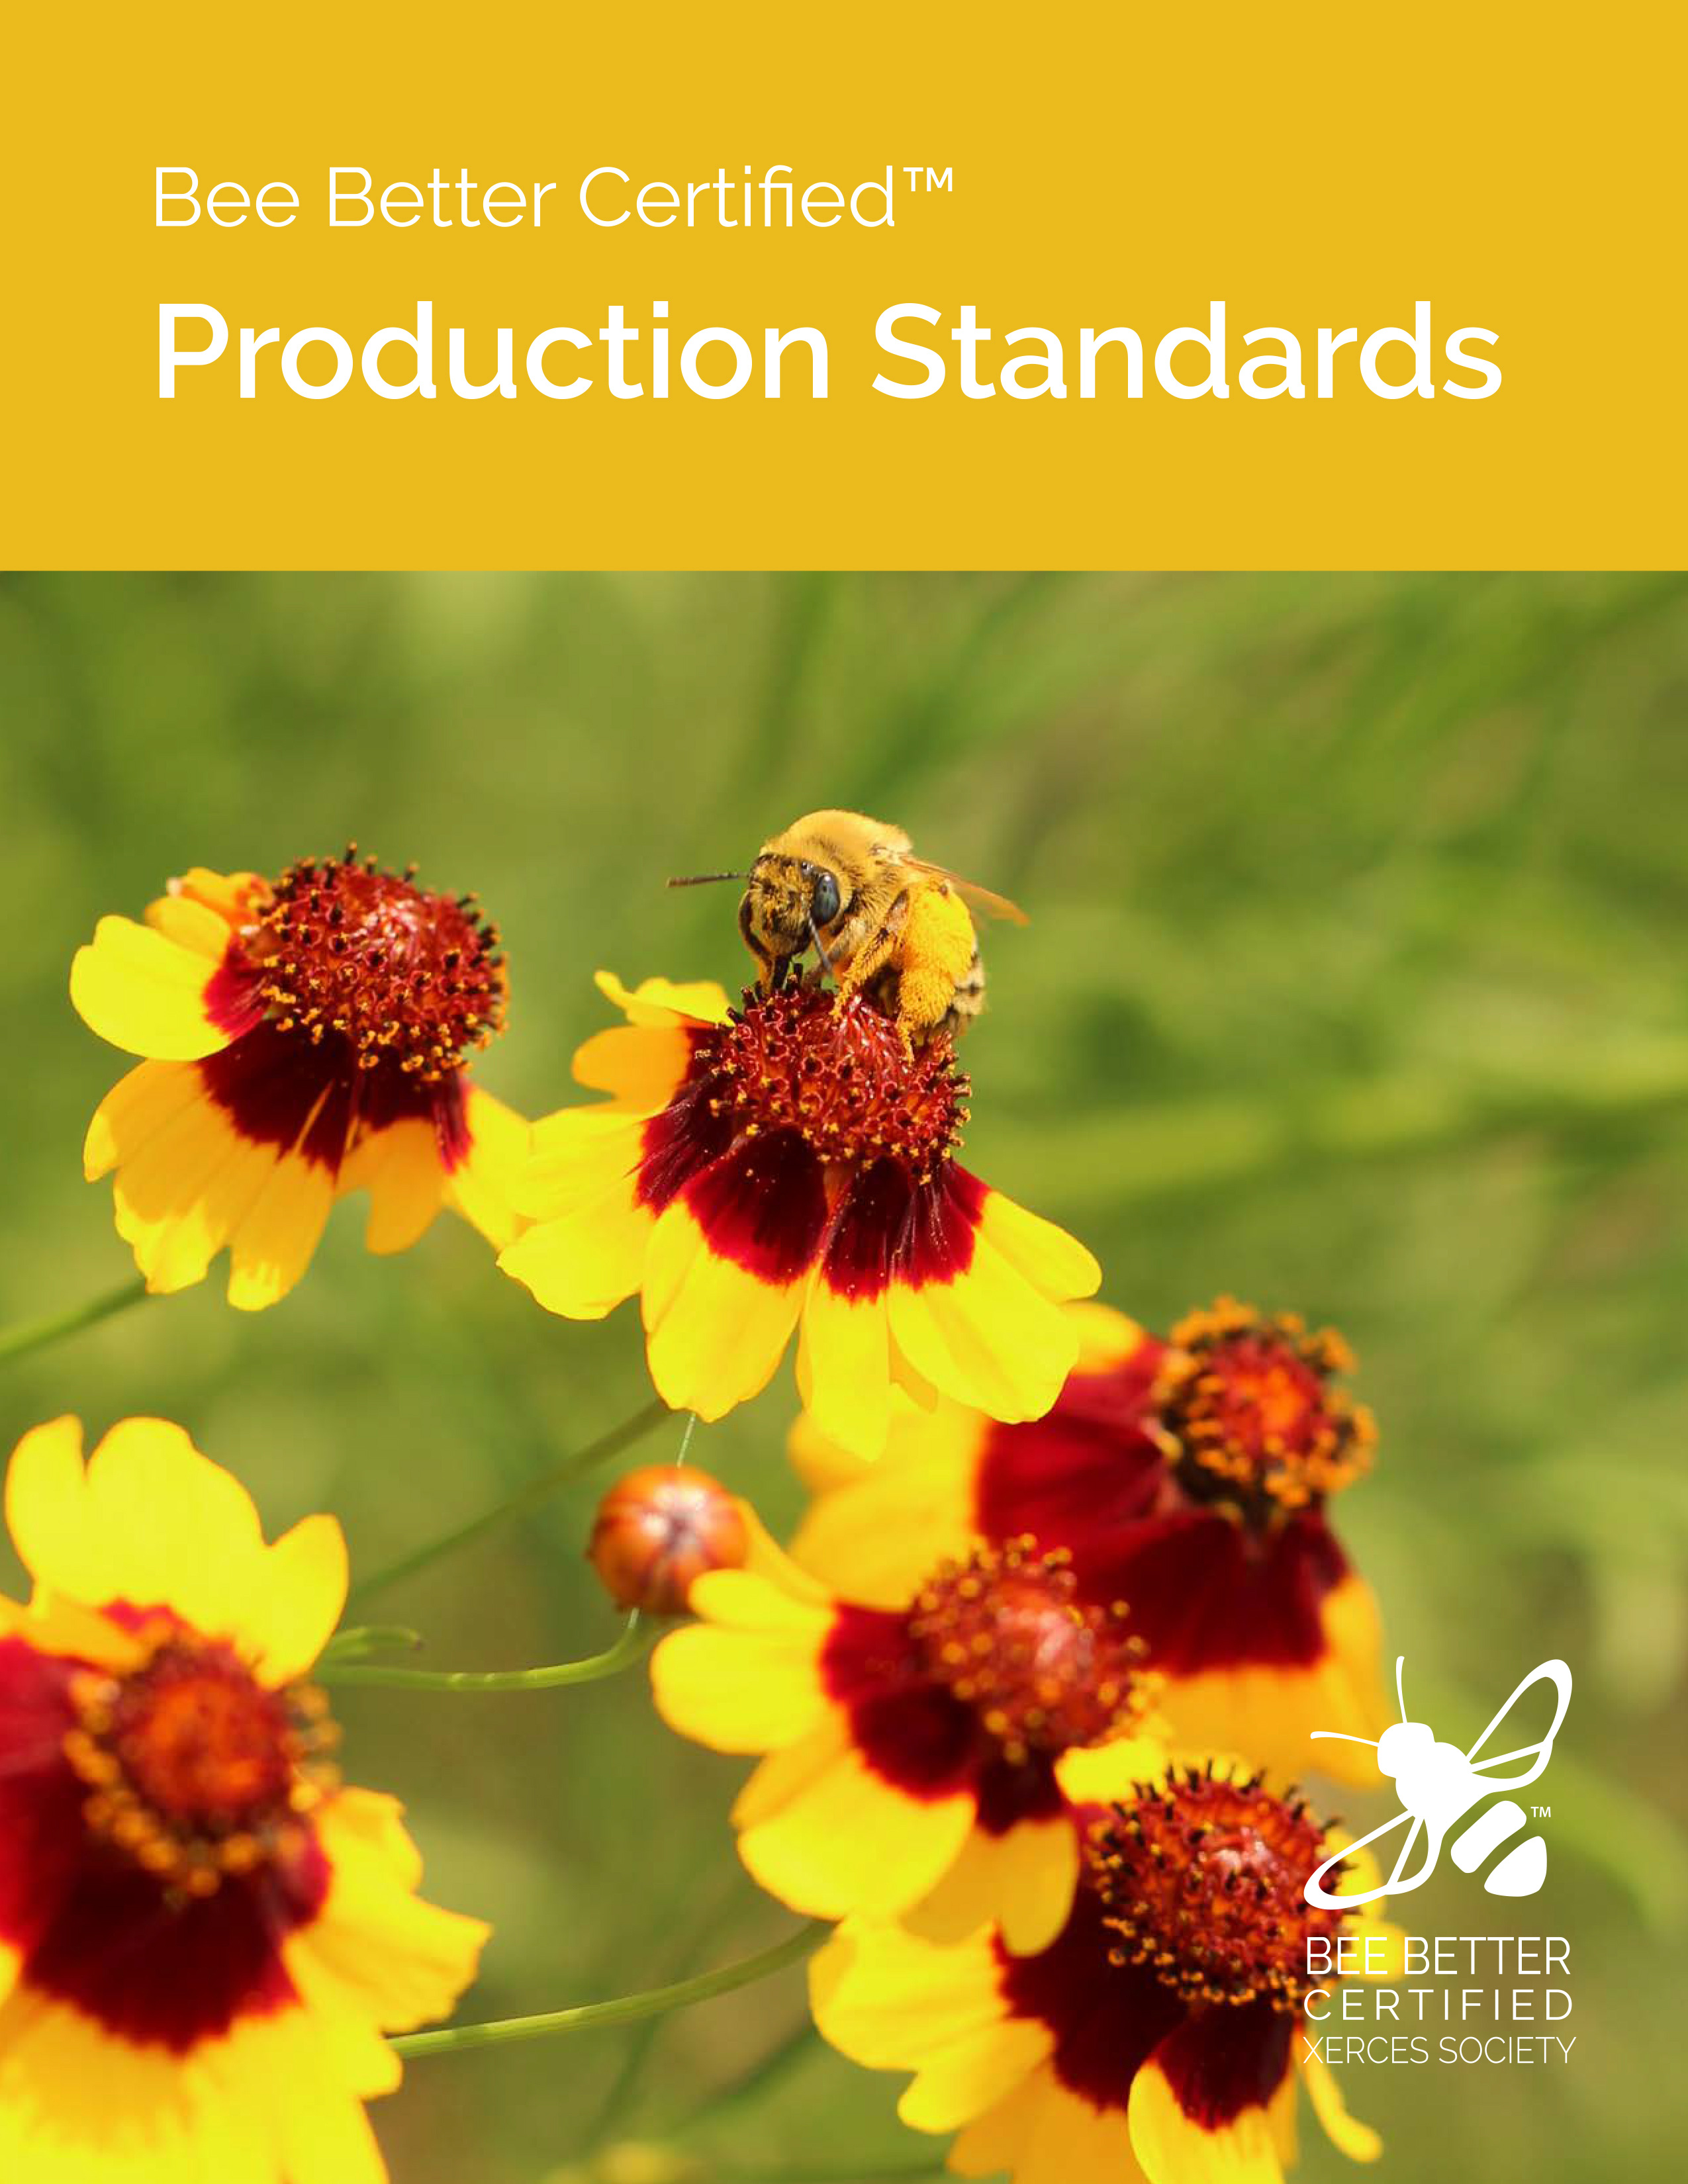 The Bee Better Certified Production Standards' cover image, with a bright photo of yellow and red blossoms visited by a bumble bee, is shown.